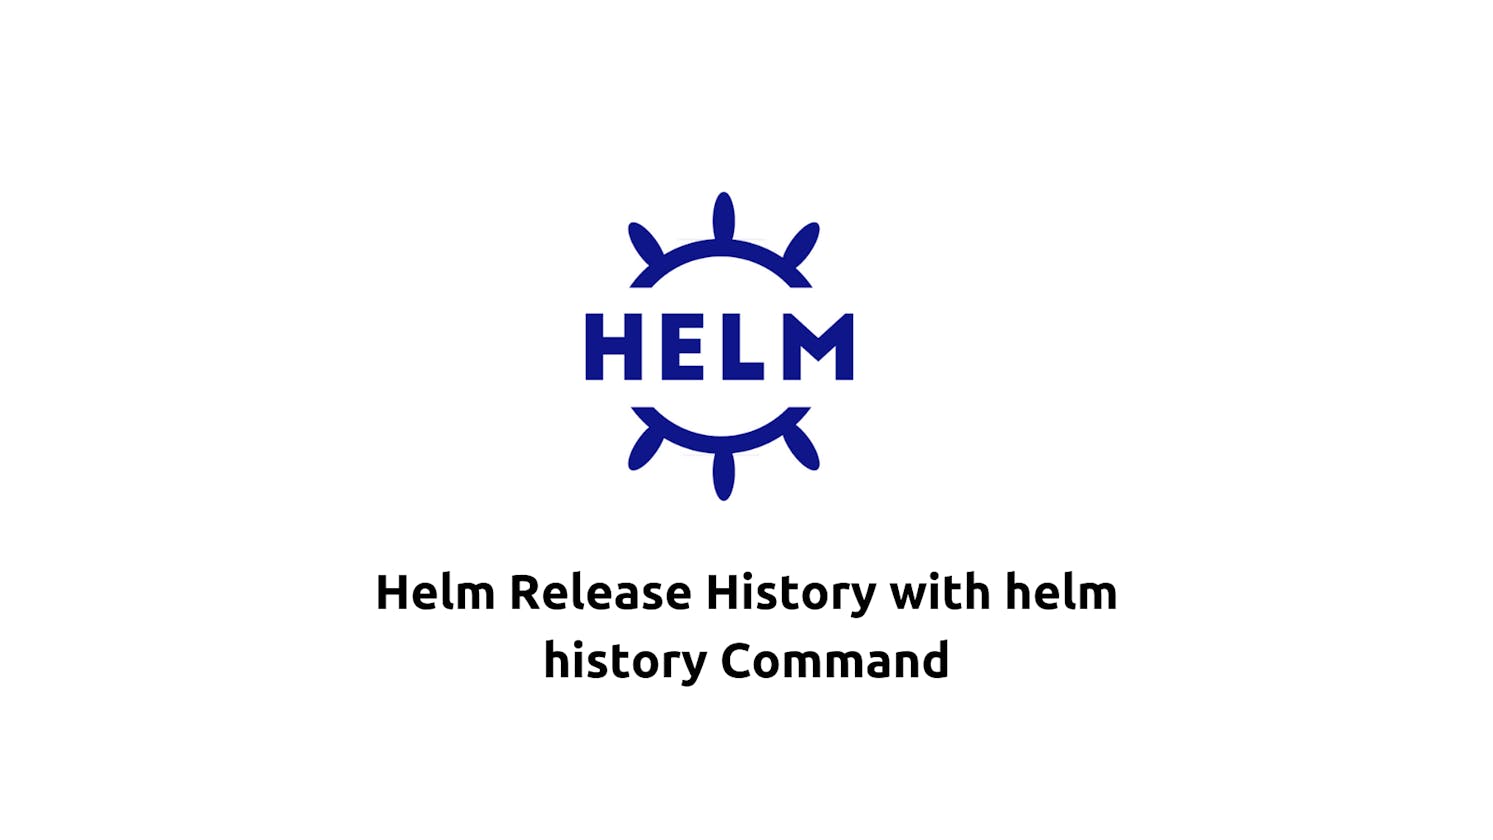 Helm Release History with helm history Command